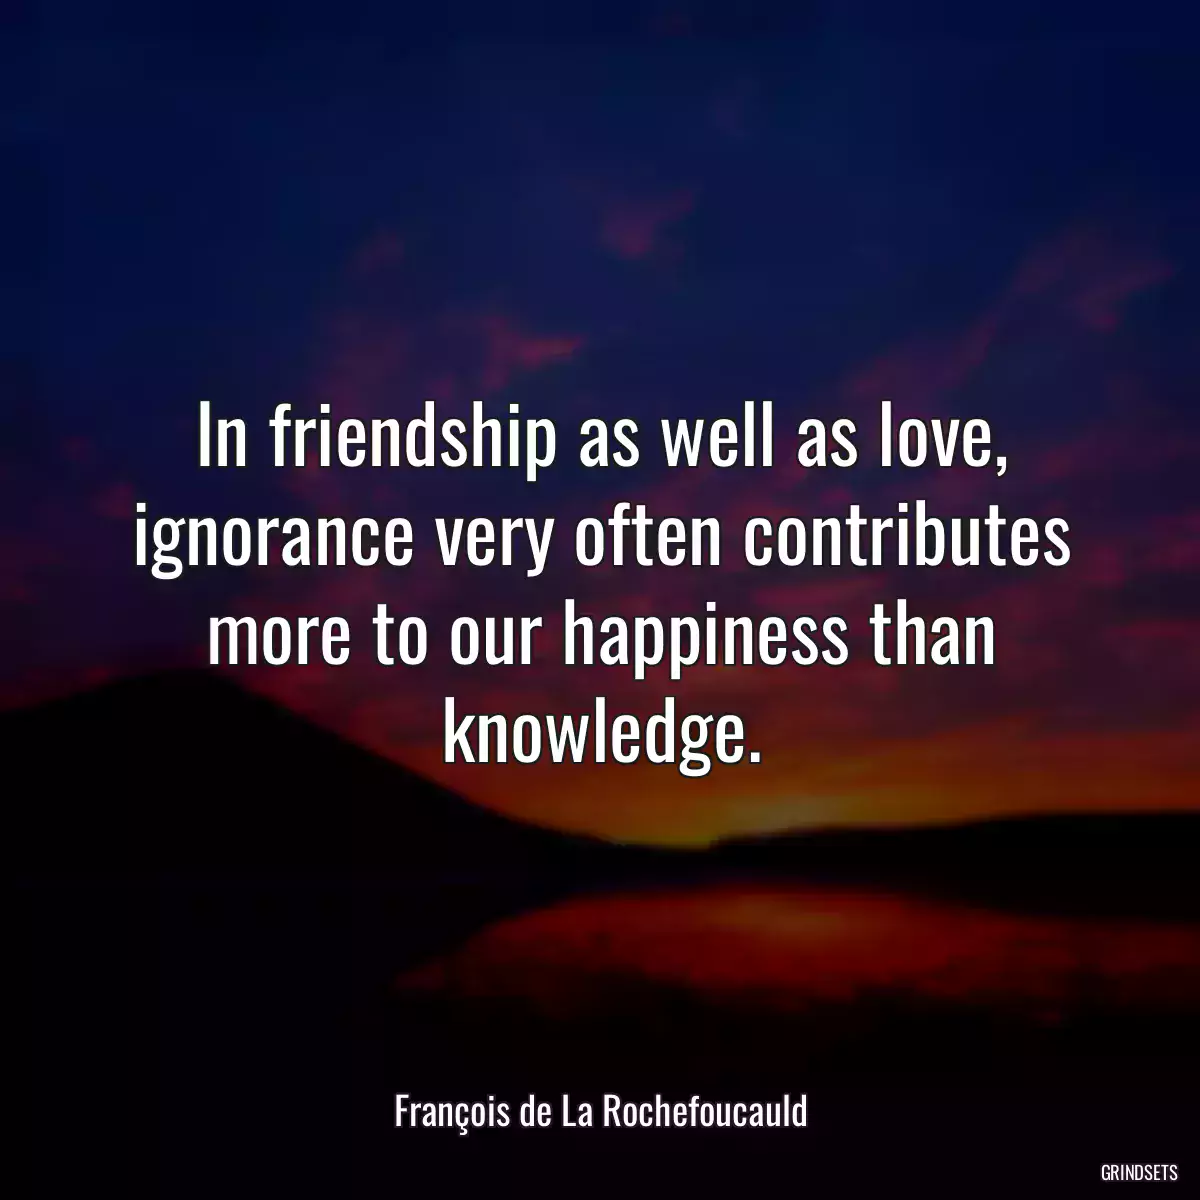 In friendship as well as love, ignorance very often contributes more to our happiness than knowledge.